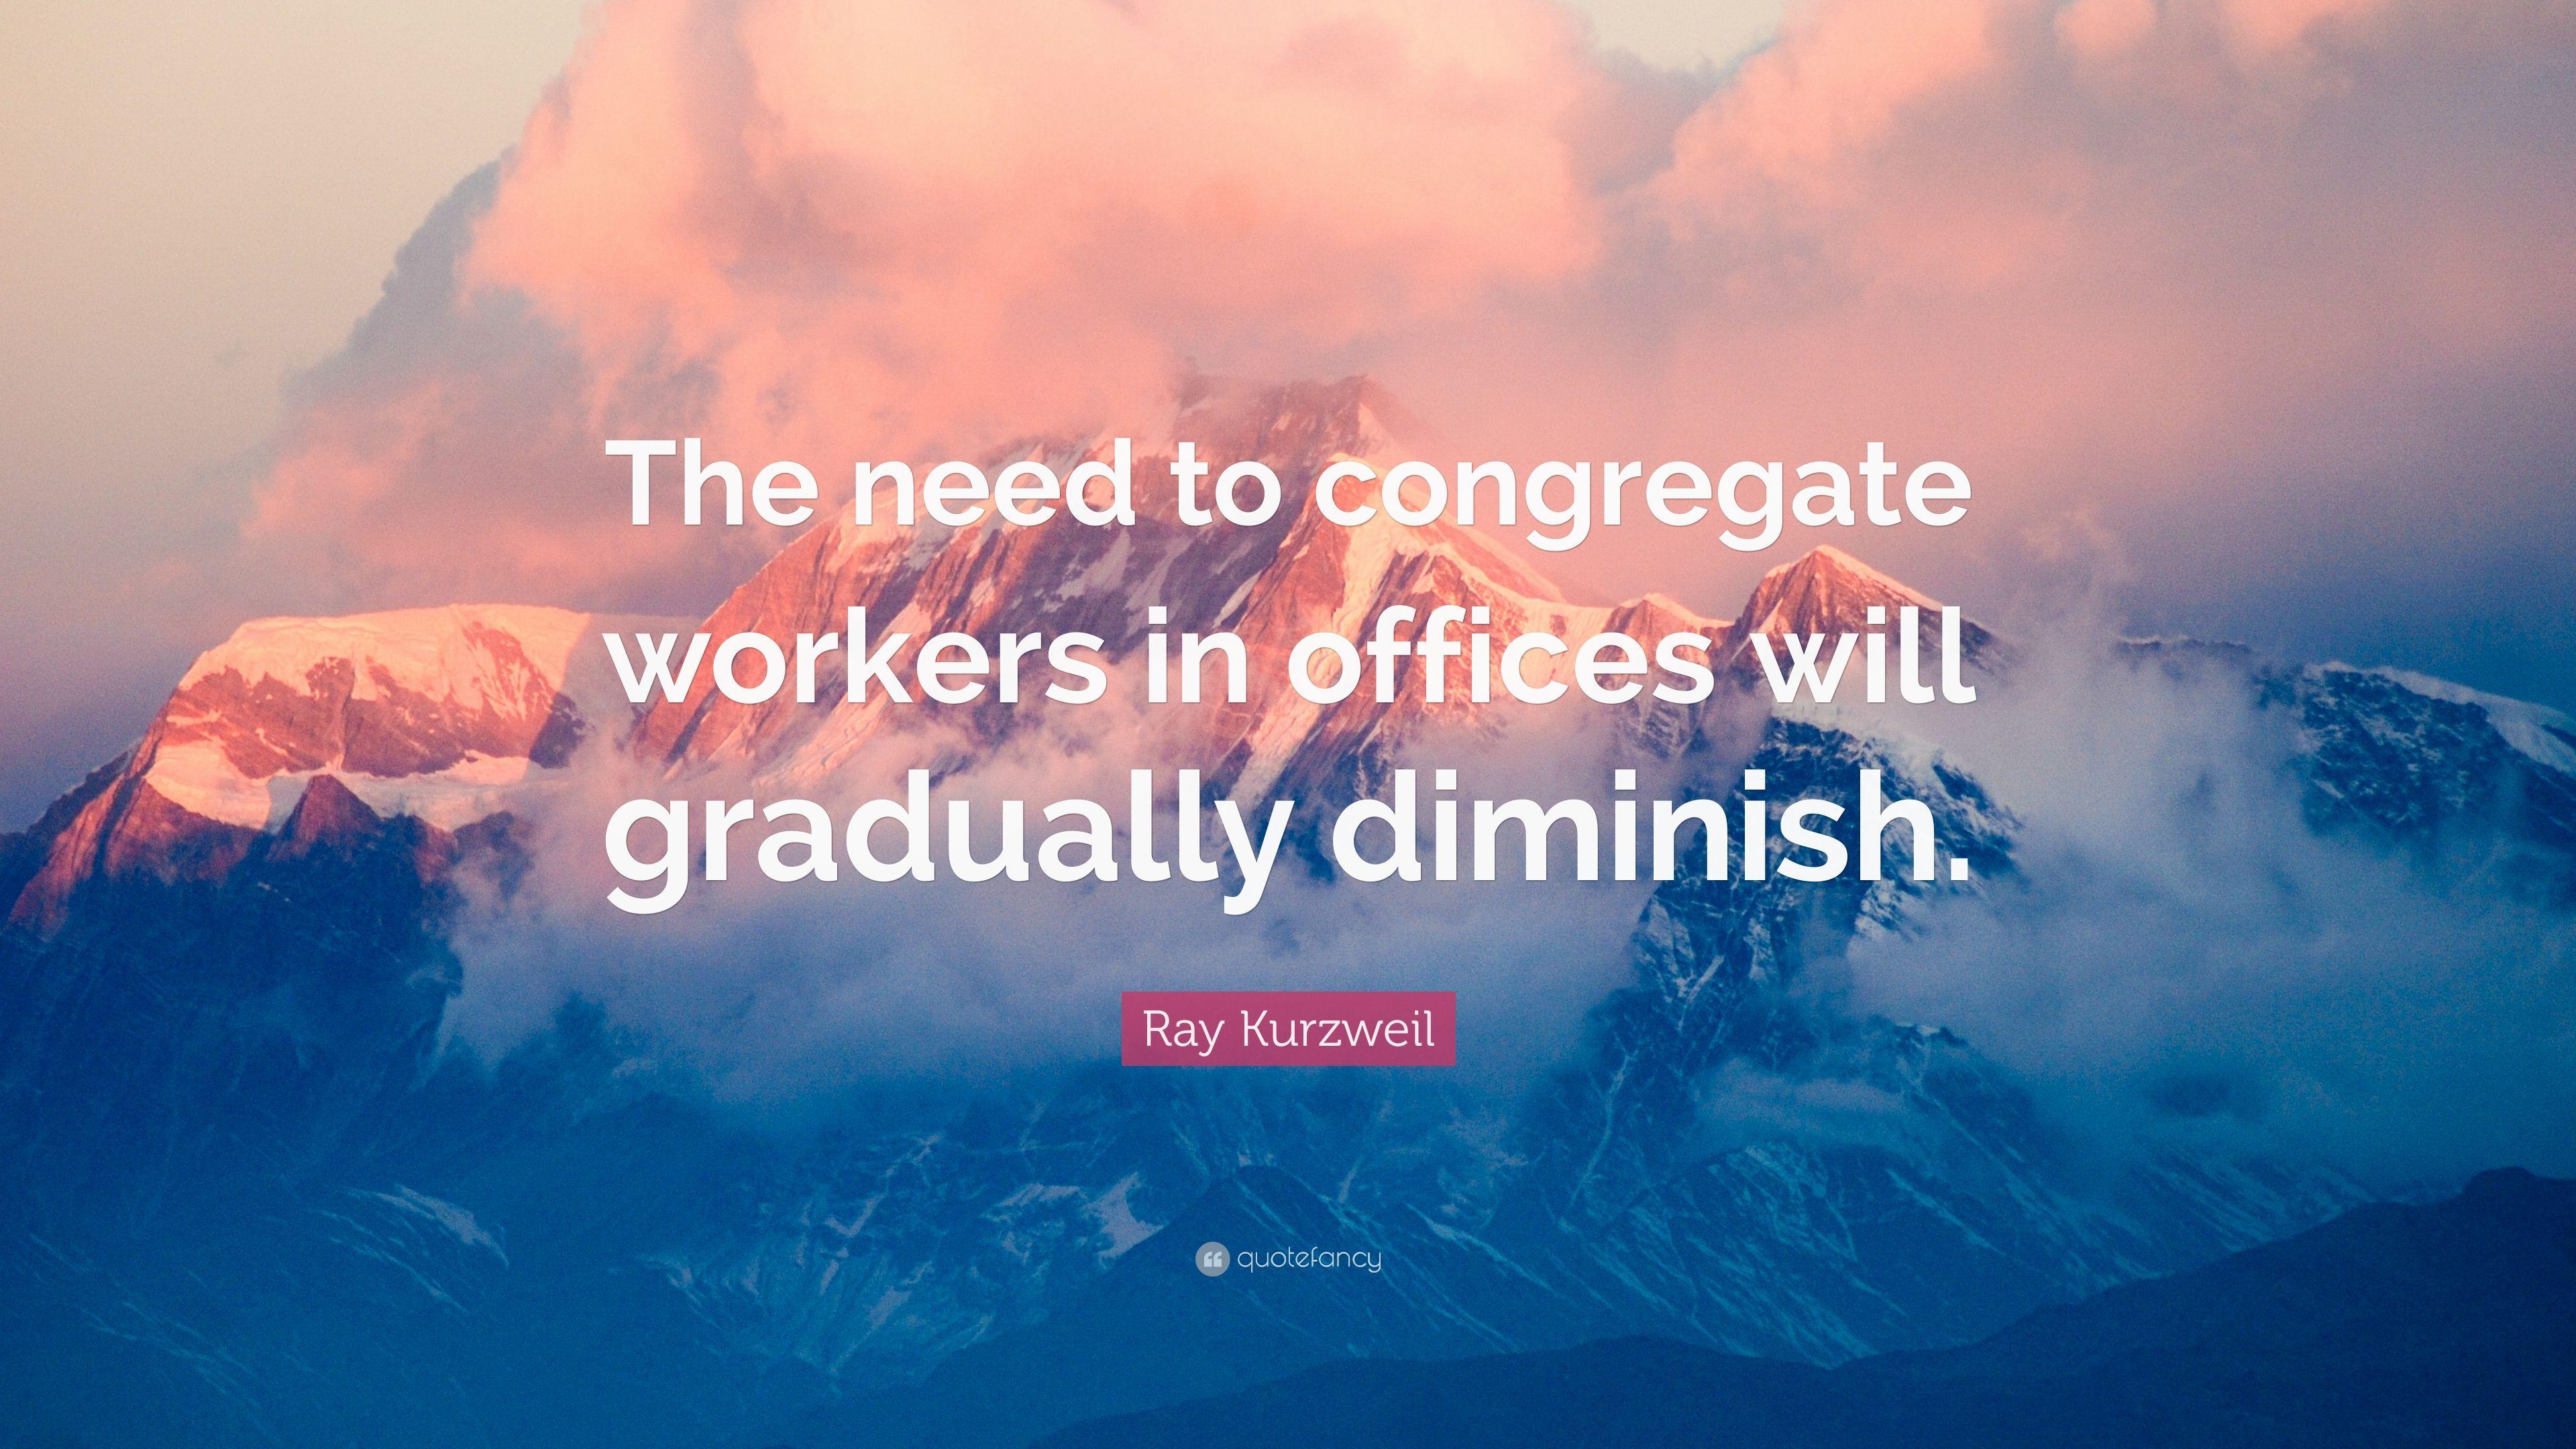 Ray Kurzweil Quote: “The need to congregate workers in offices will